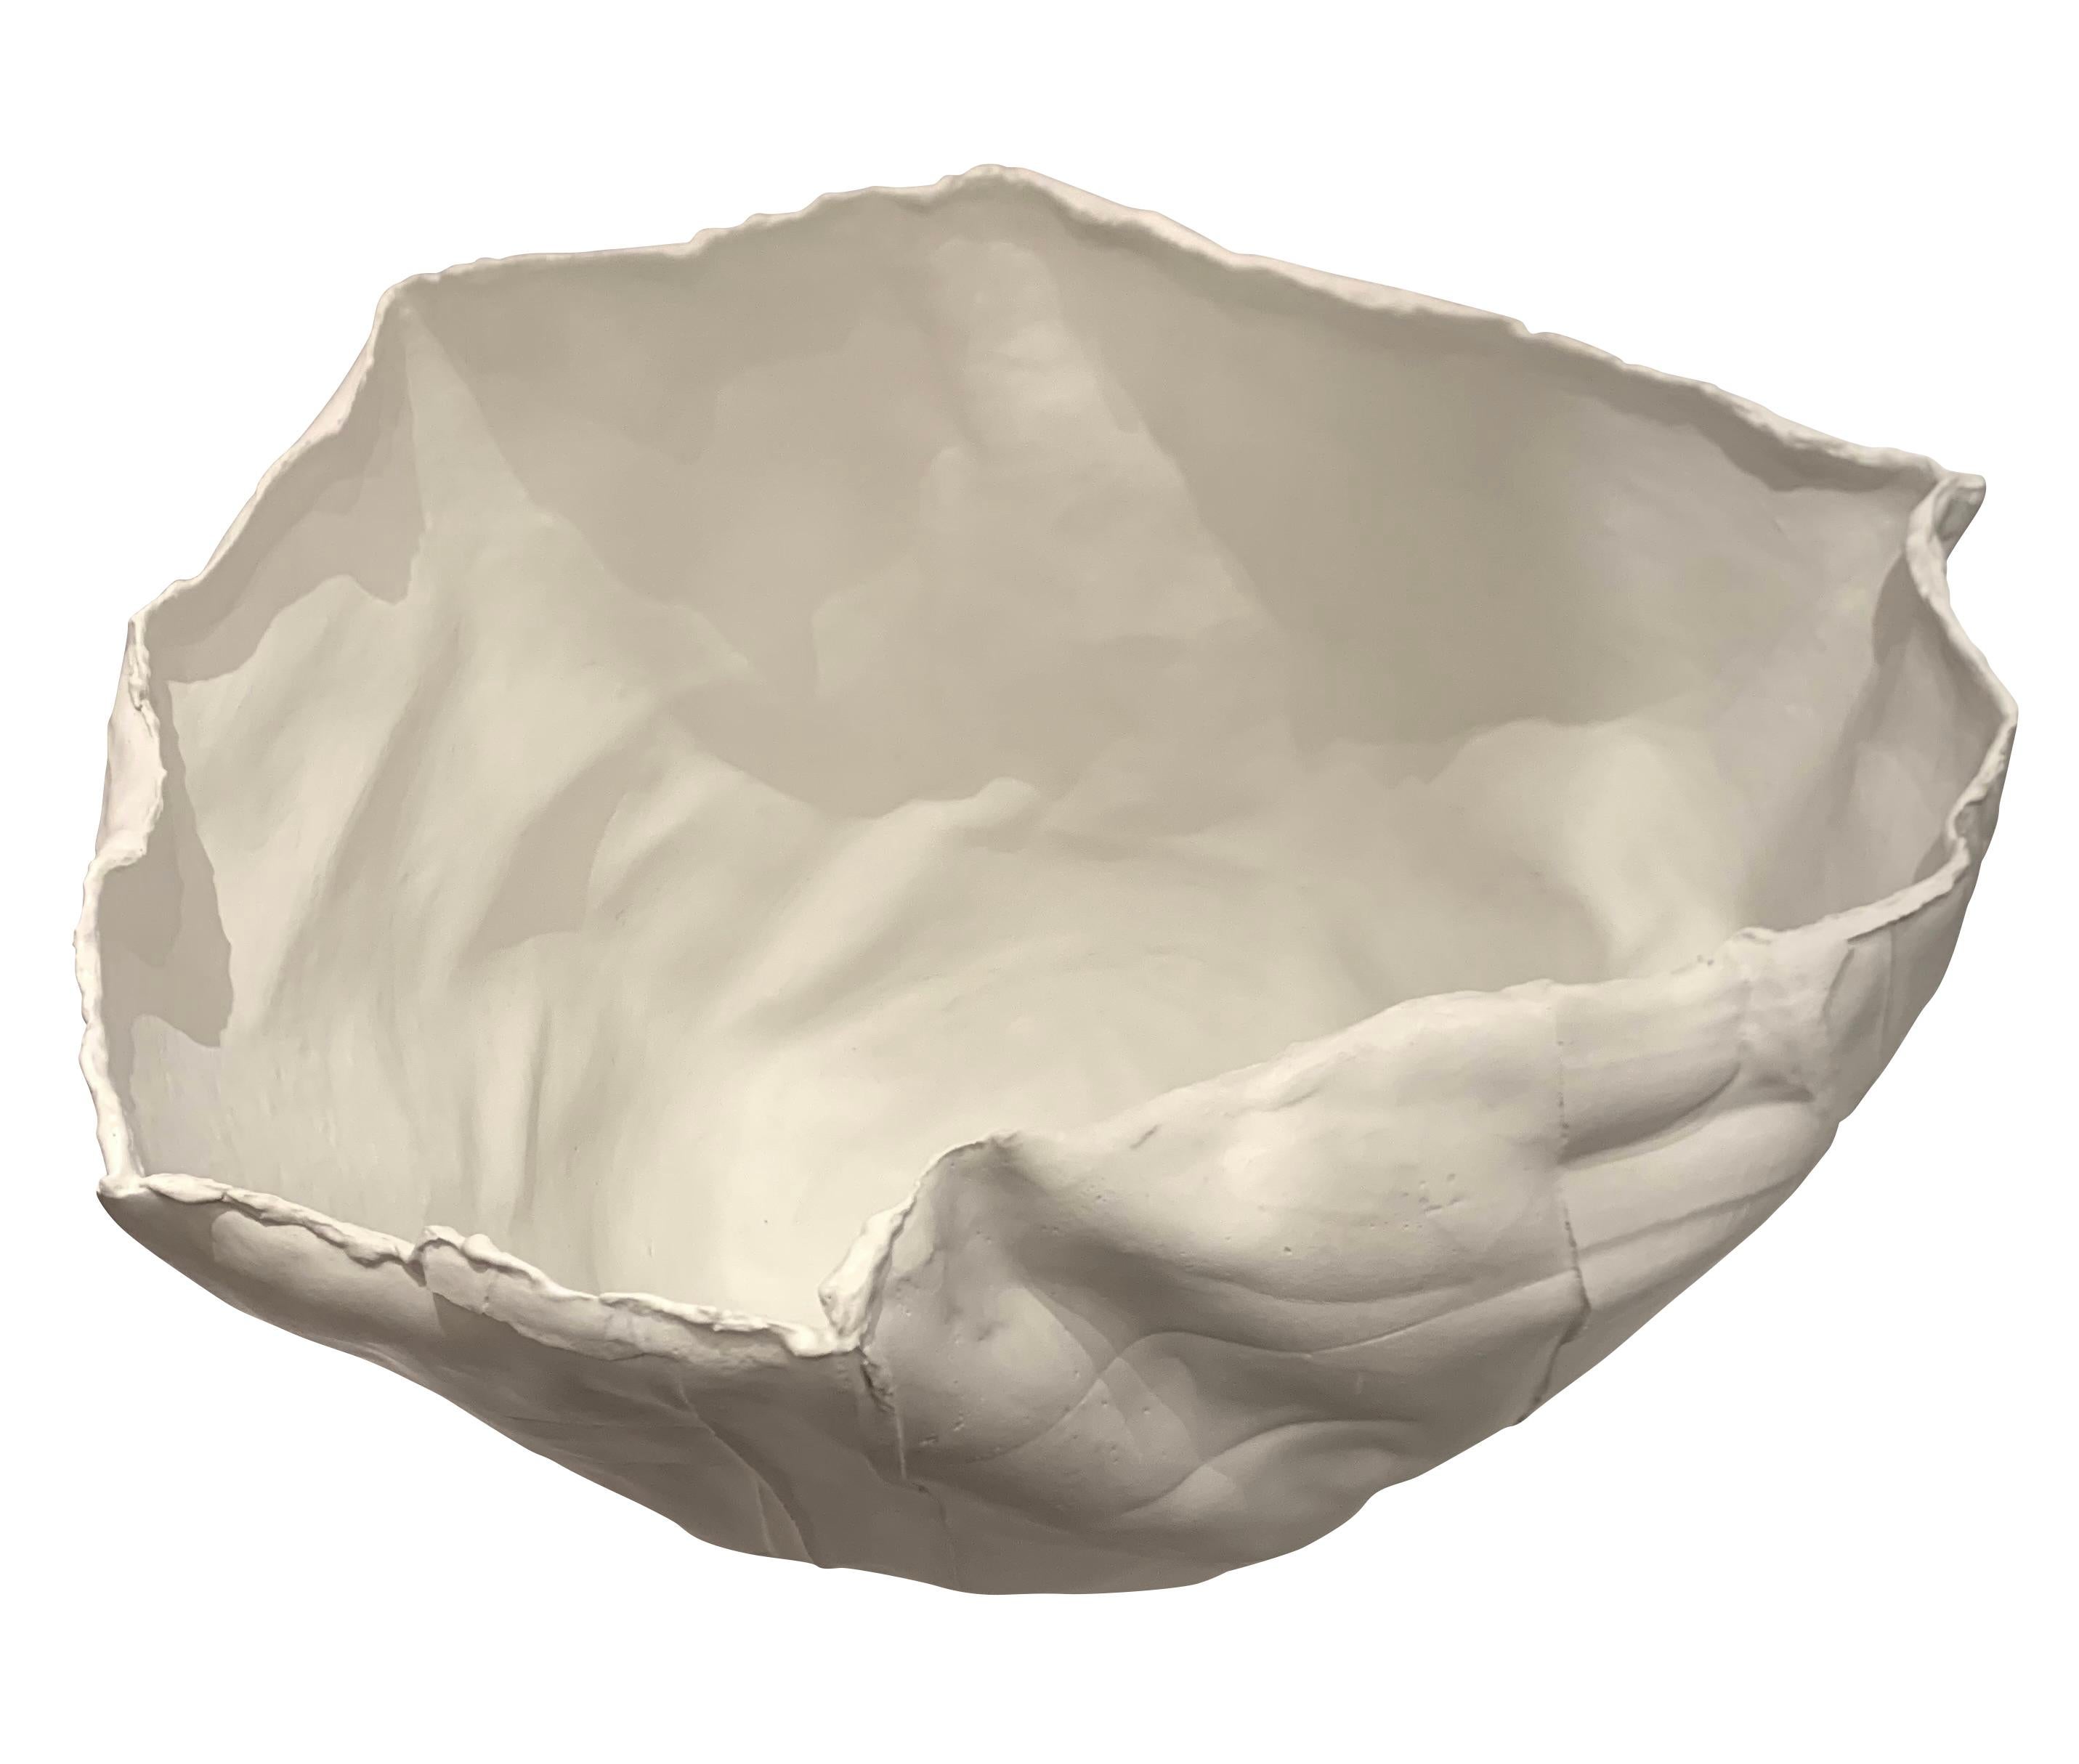 Italian white porcelain bowl with wide rib textured design.
Free form organic shape.
 